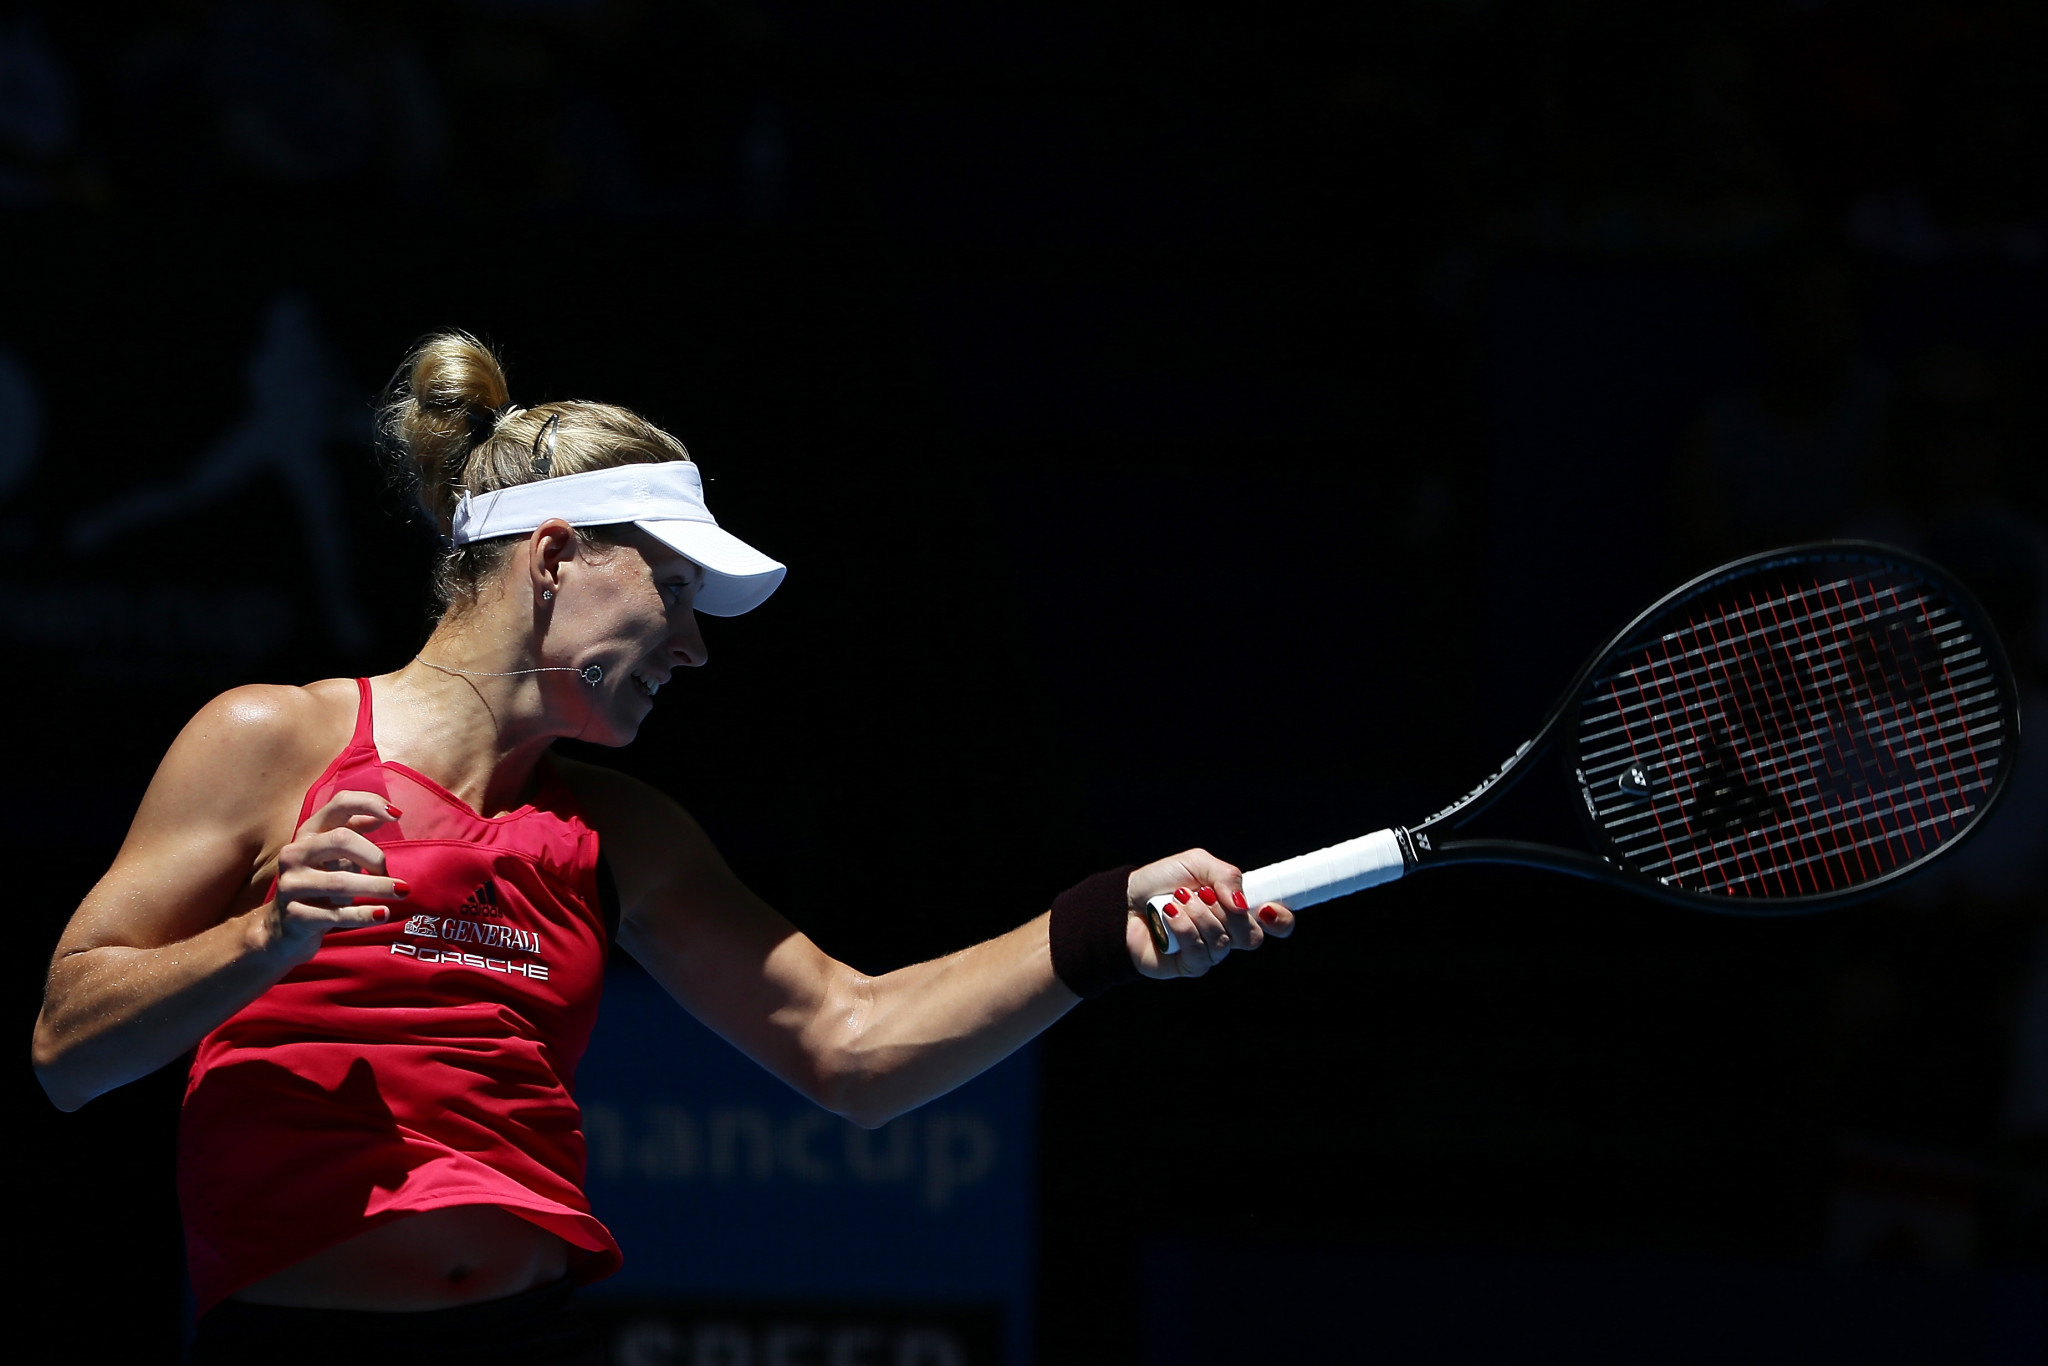 Angelique Kerber won eight consecutive games in her match against Eugenie Bouchard ©Getty Images